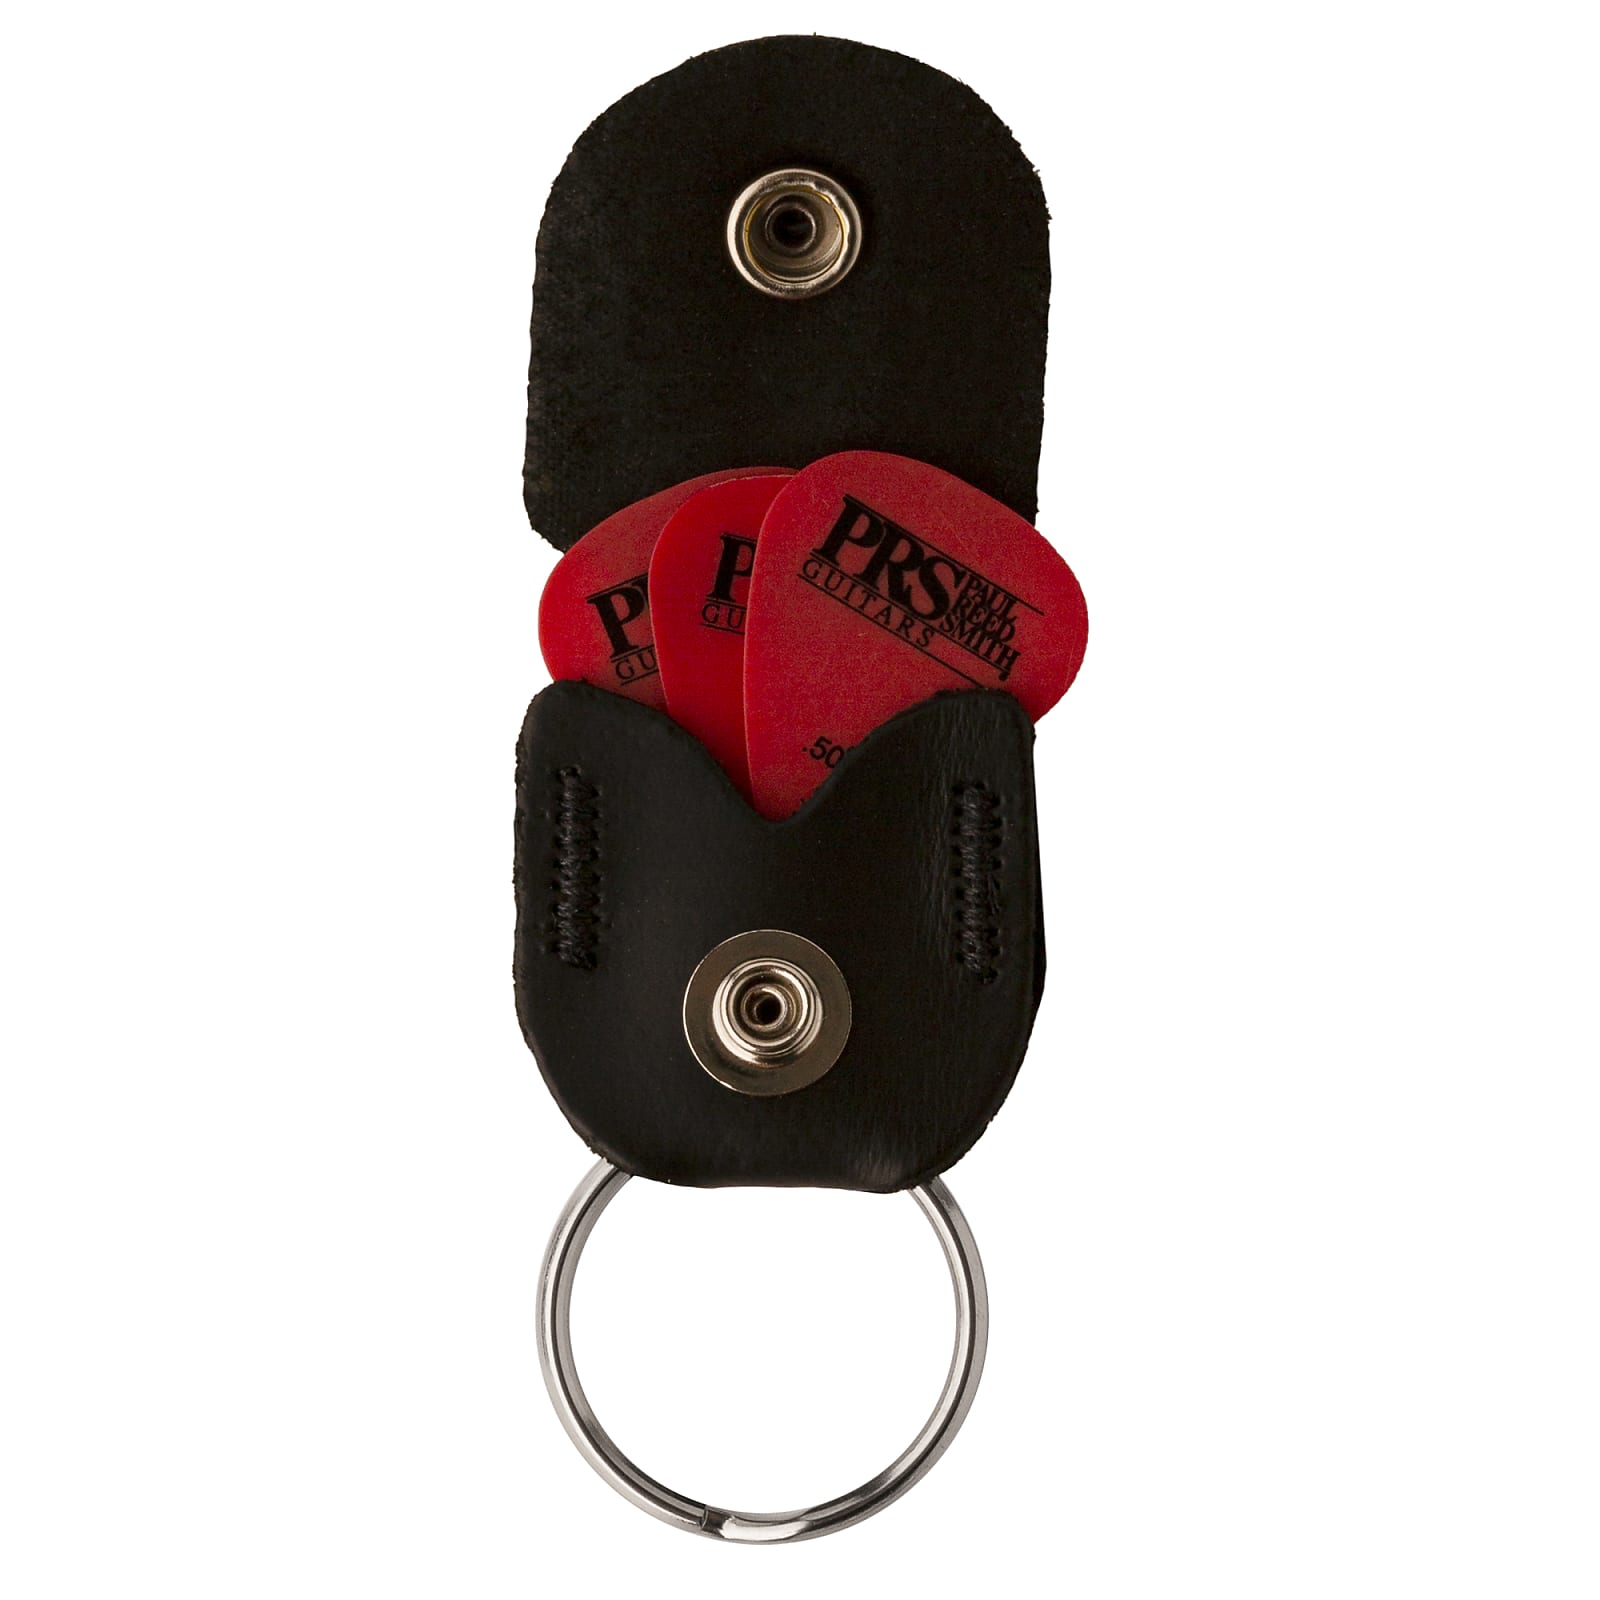 Paul Reed Smith PRS Keychain Leather Key Ring Pick Holder Black / Silver